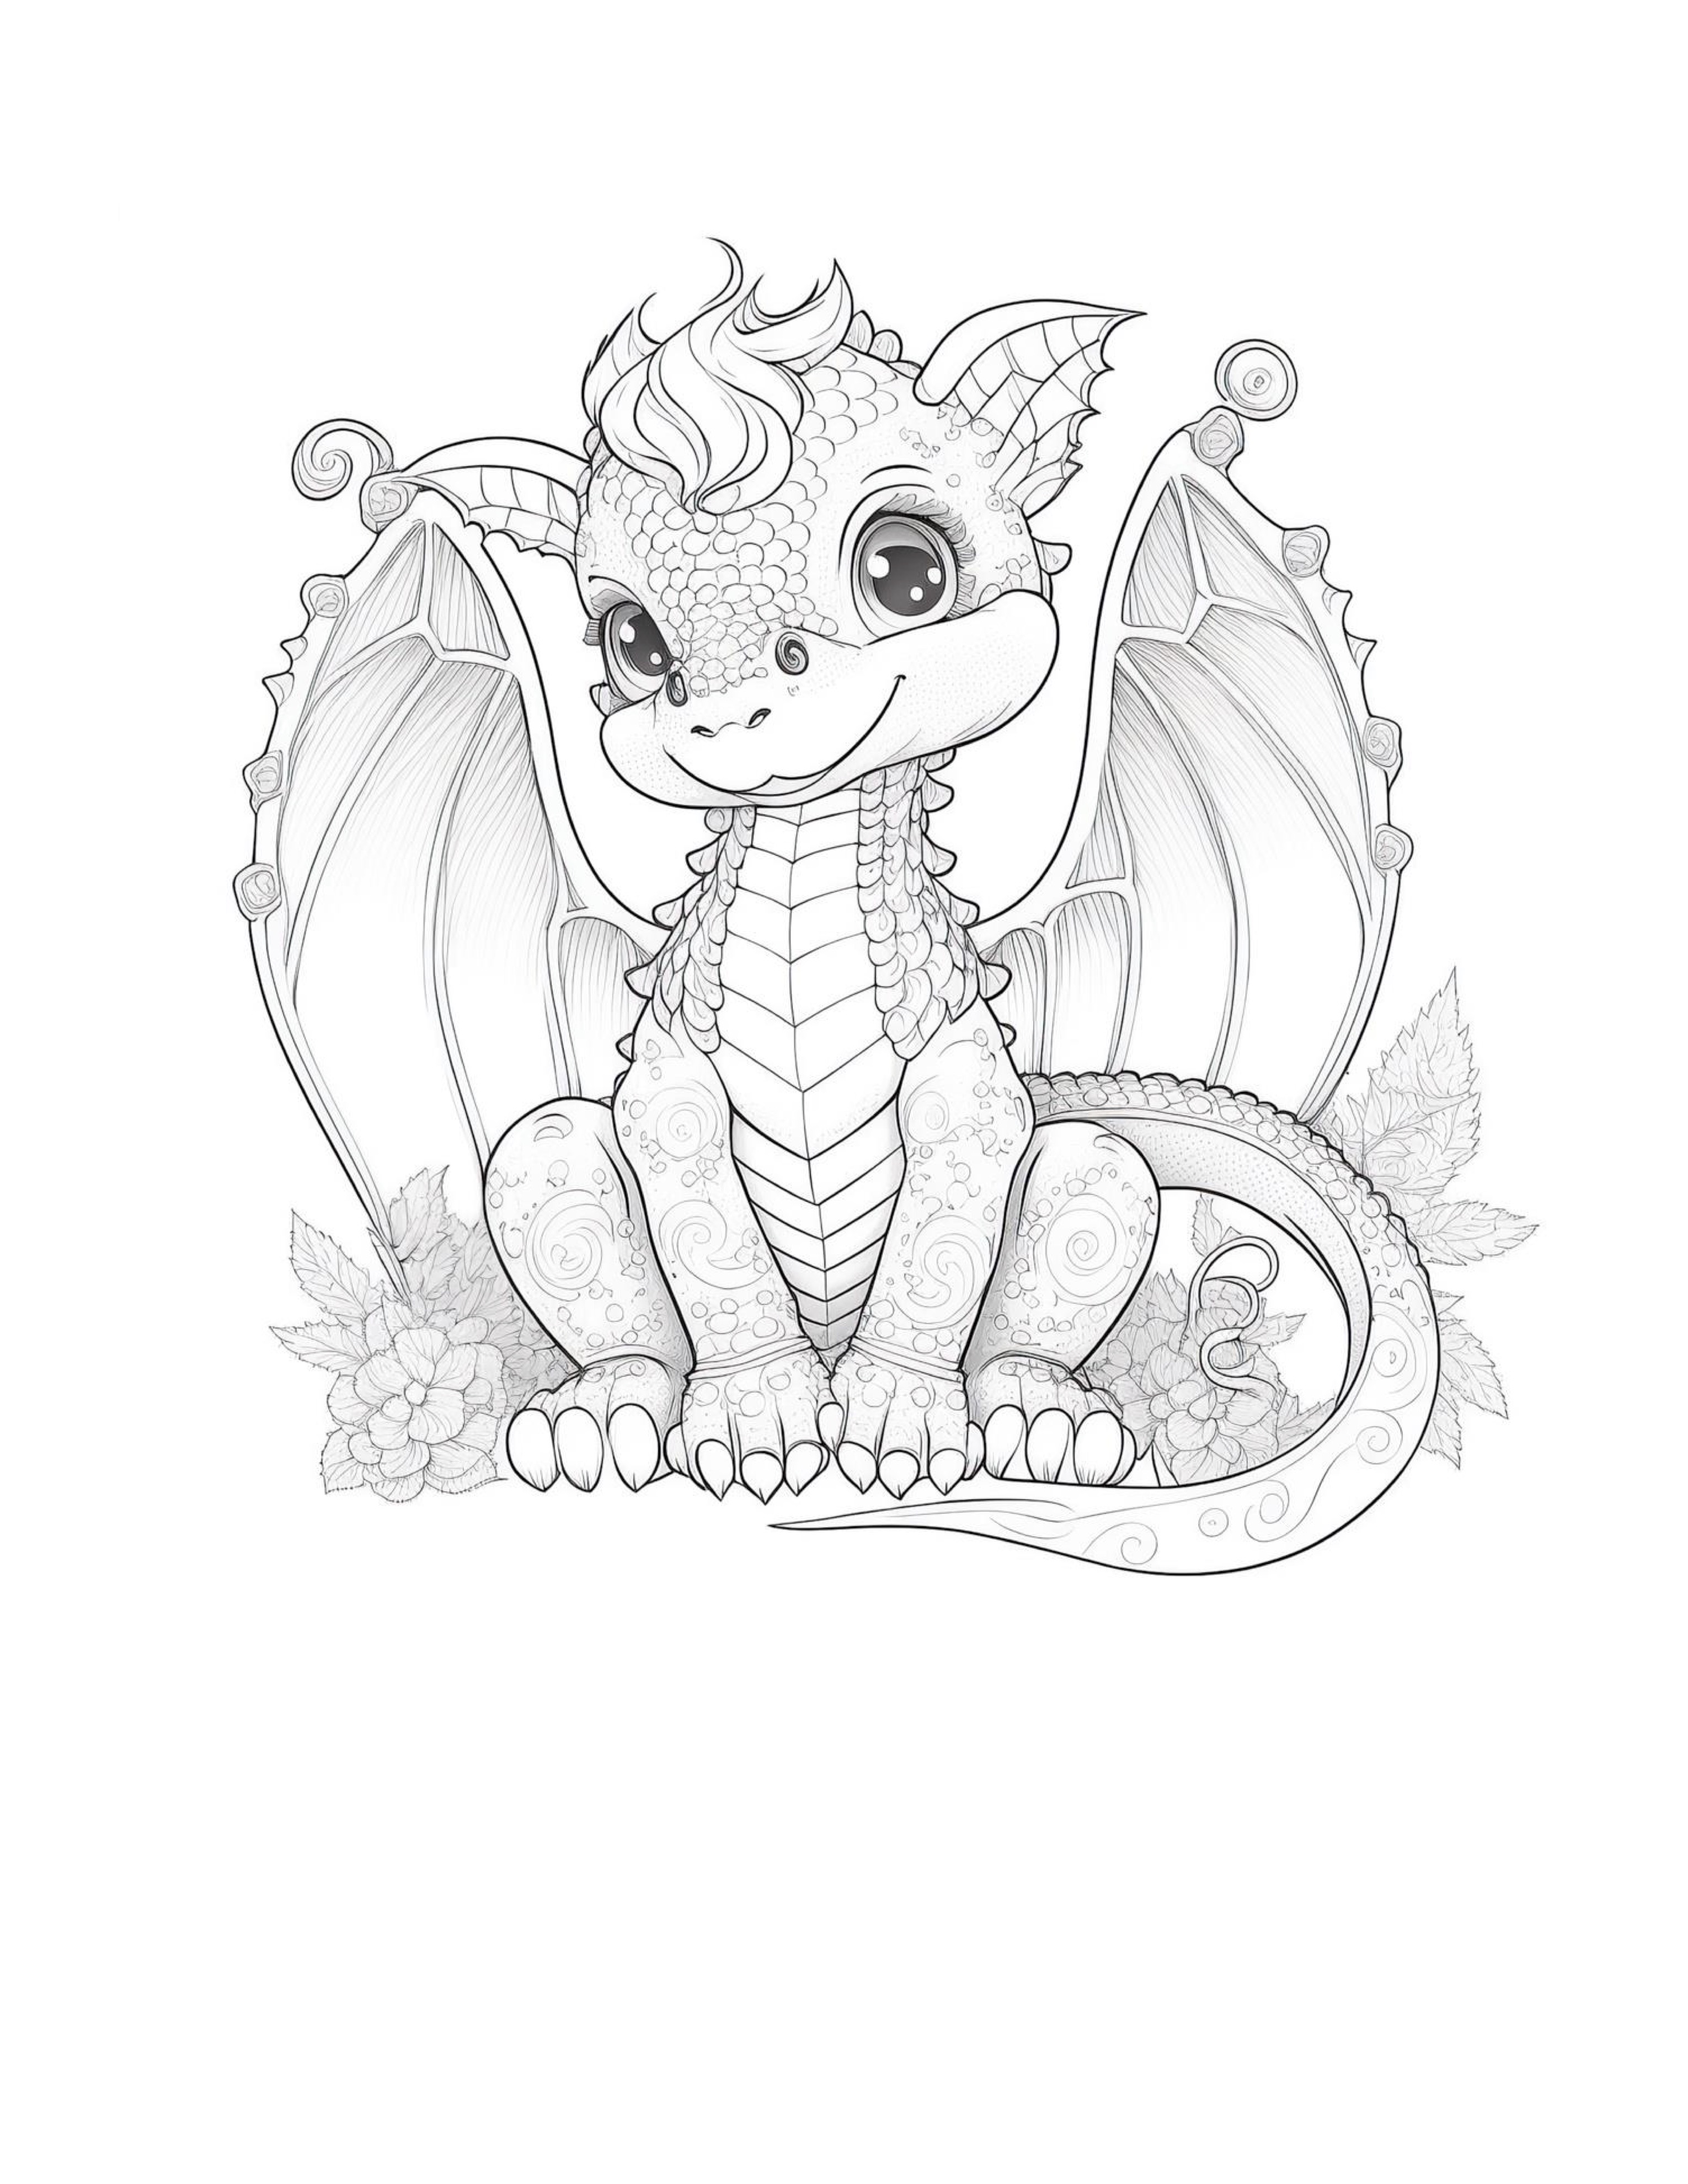 sweet-dragon-coloring-pages.jpg